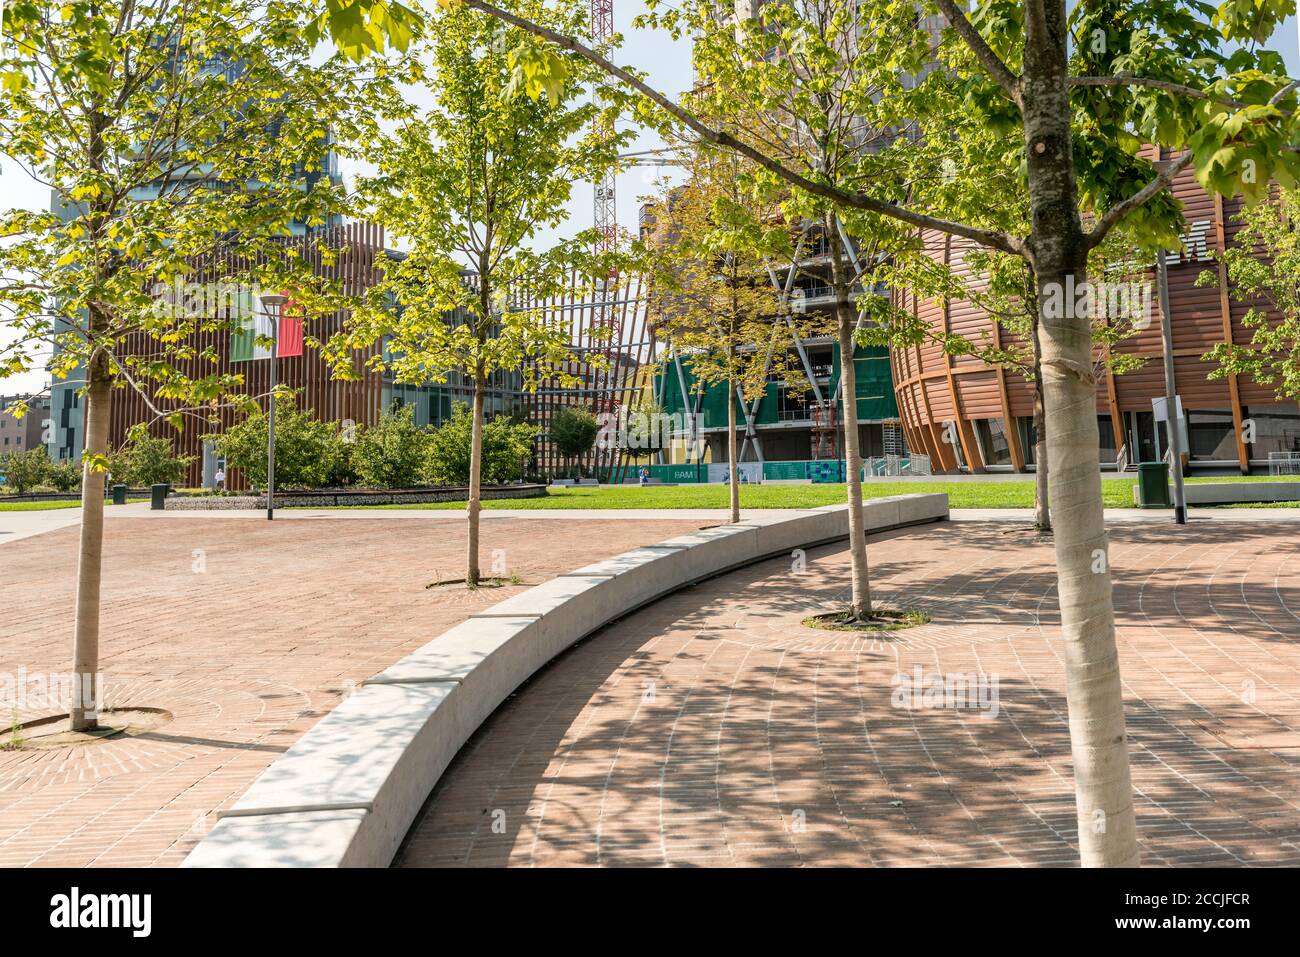 MILAN, ITALY - August 20 2020: cityscape with young trees on paved ground at business hub urban renewal development, shot on august 20 2020 at Milan, Stock Photo